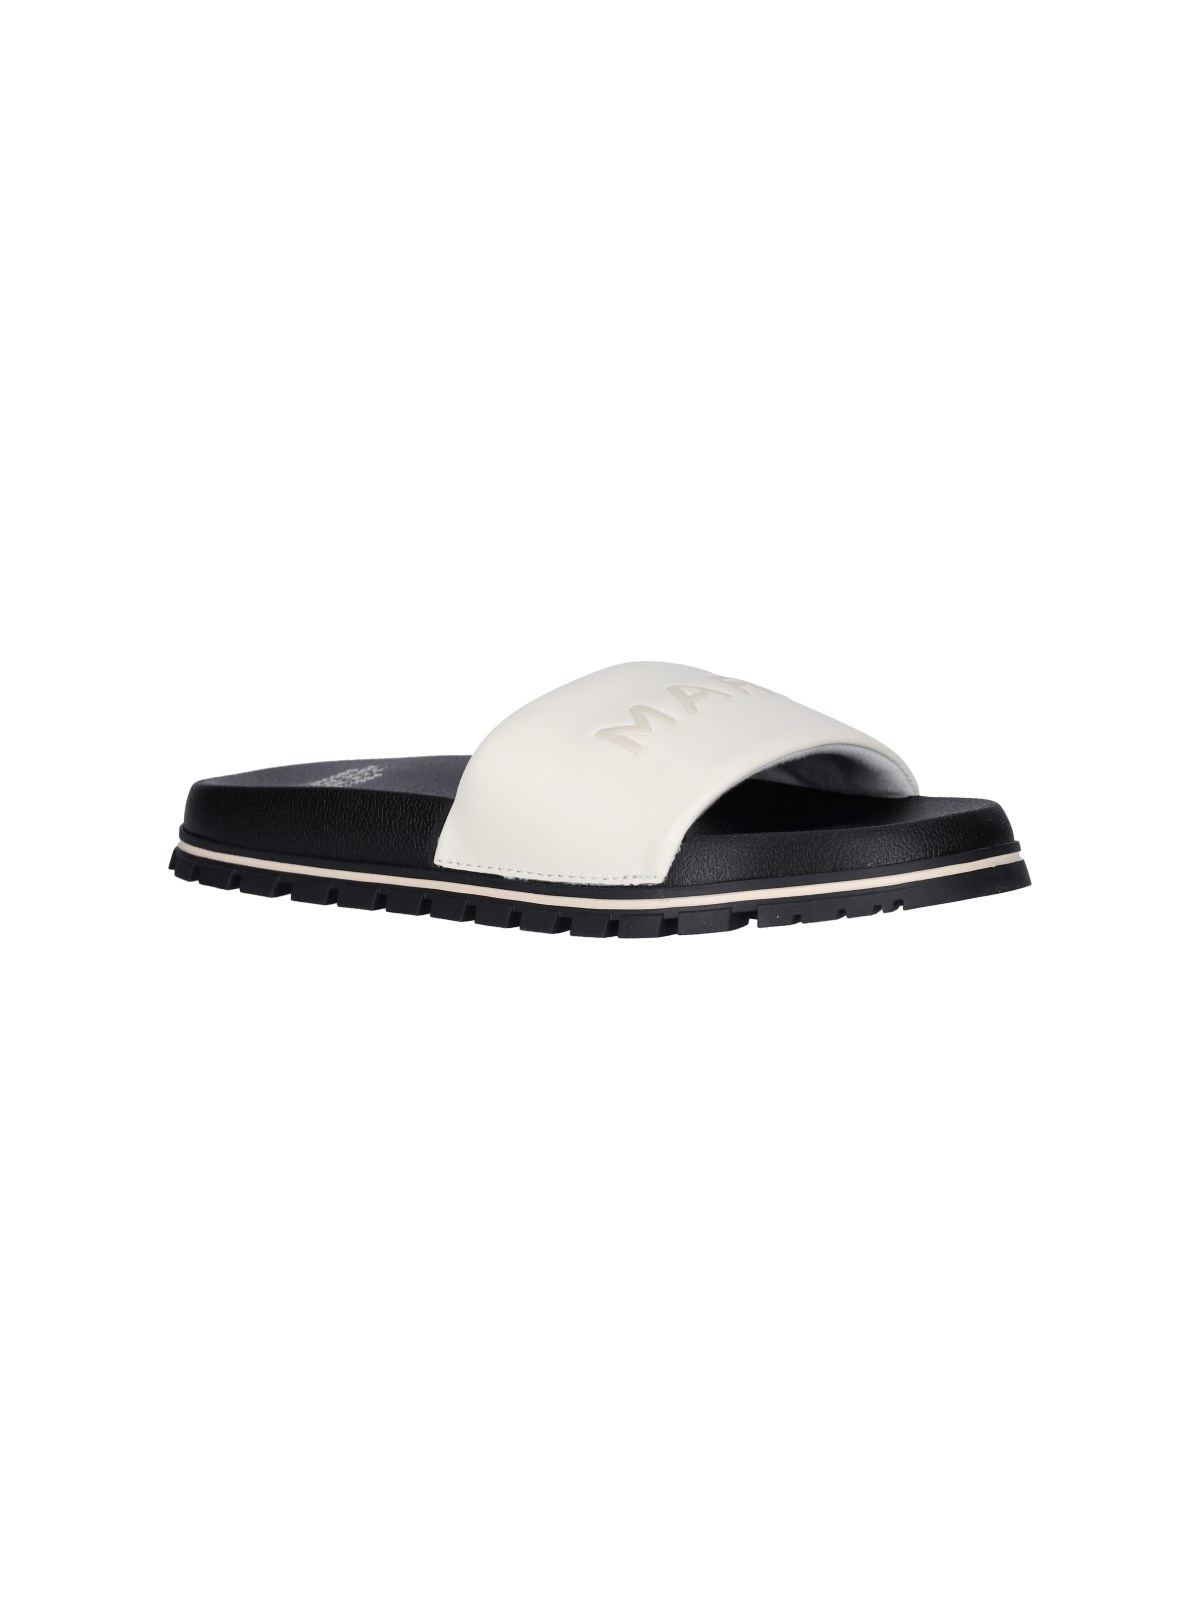 "THE LEATHER" SLIDE SANDALS - 2